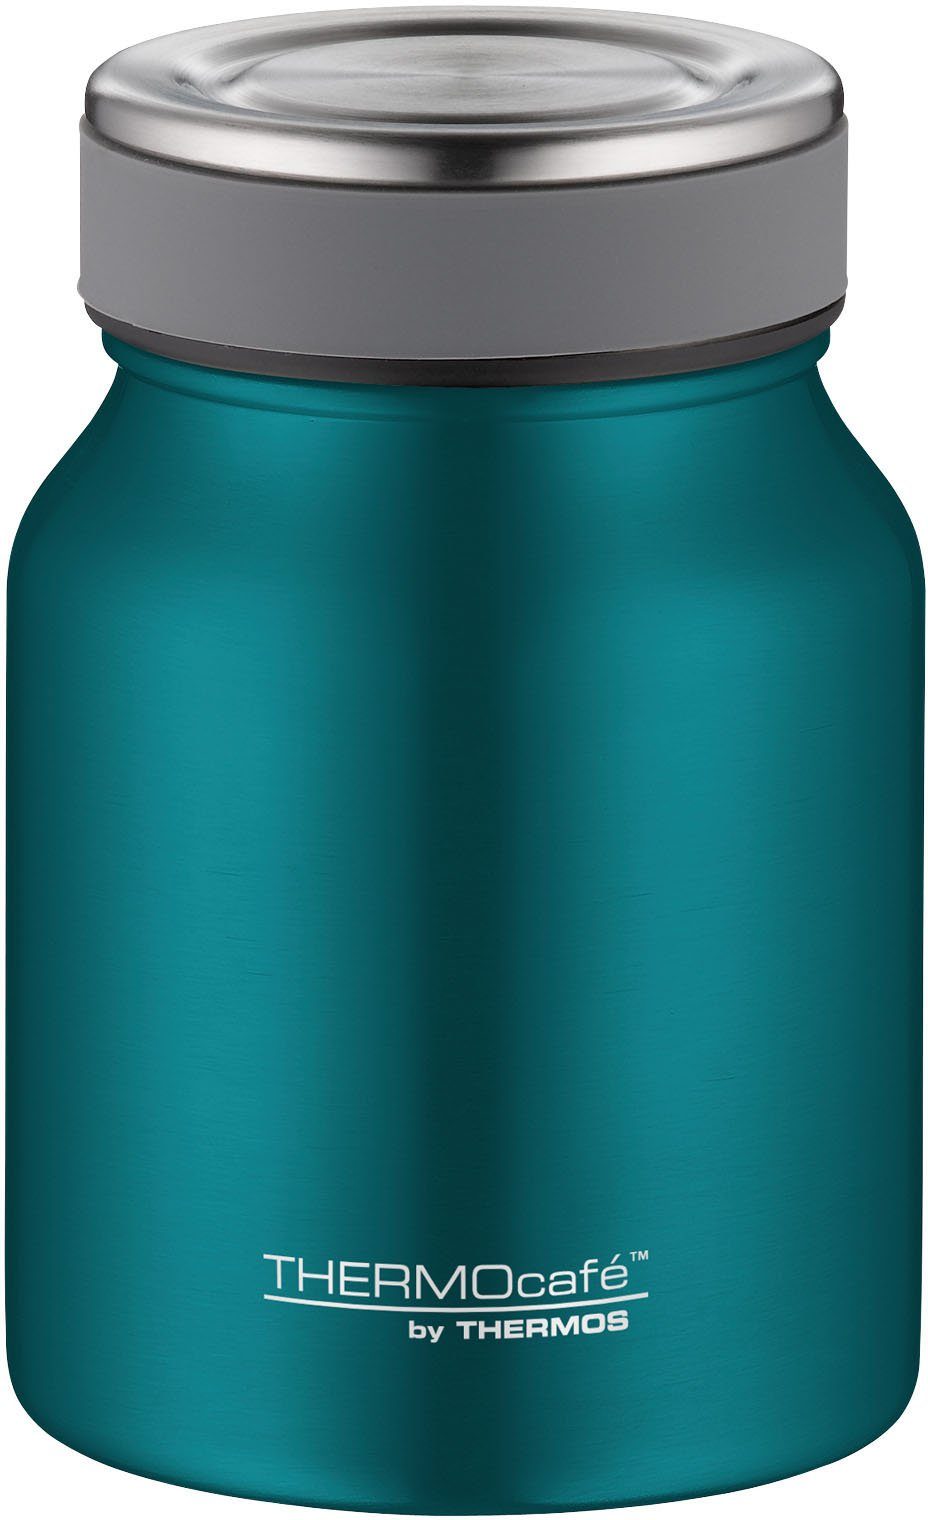 (1-tlg), Thermobehälter Liter Teal 0,5 THERMOS ThermoCafé, Edelstahl,